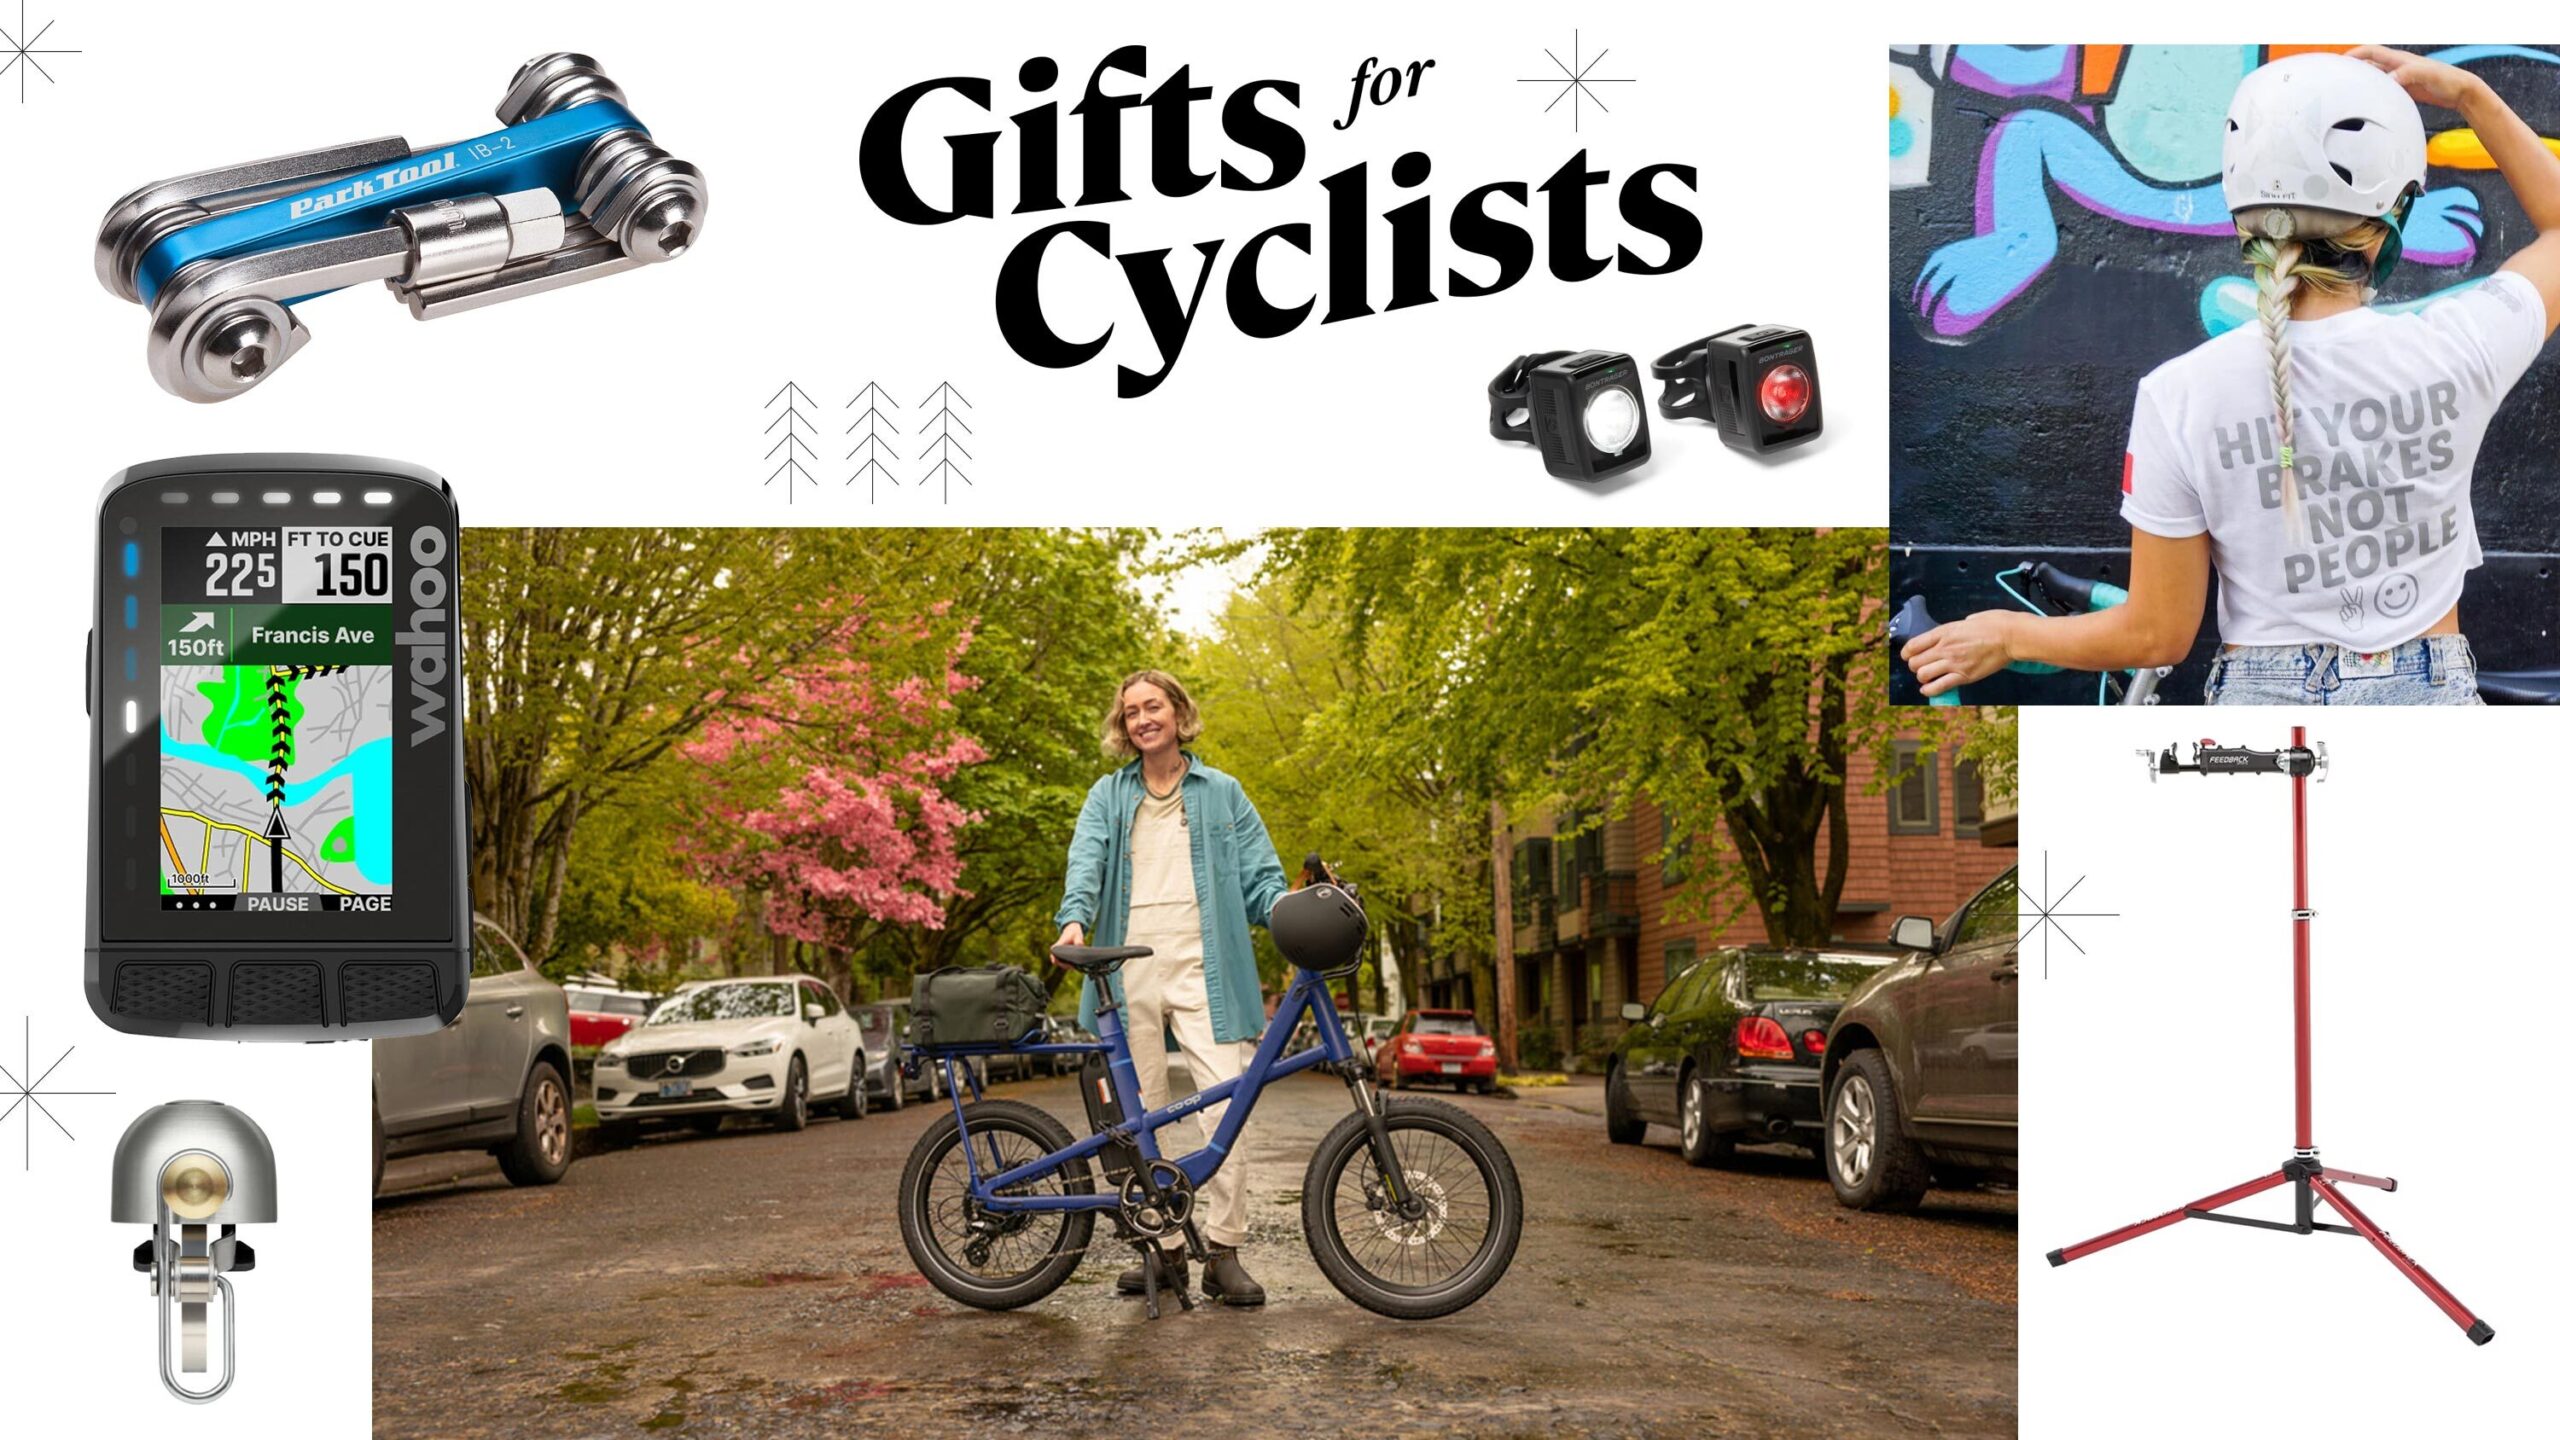 Best Gifts for cyclists